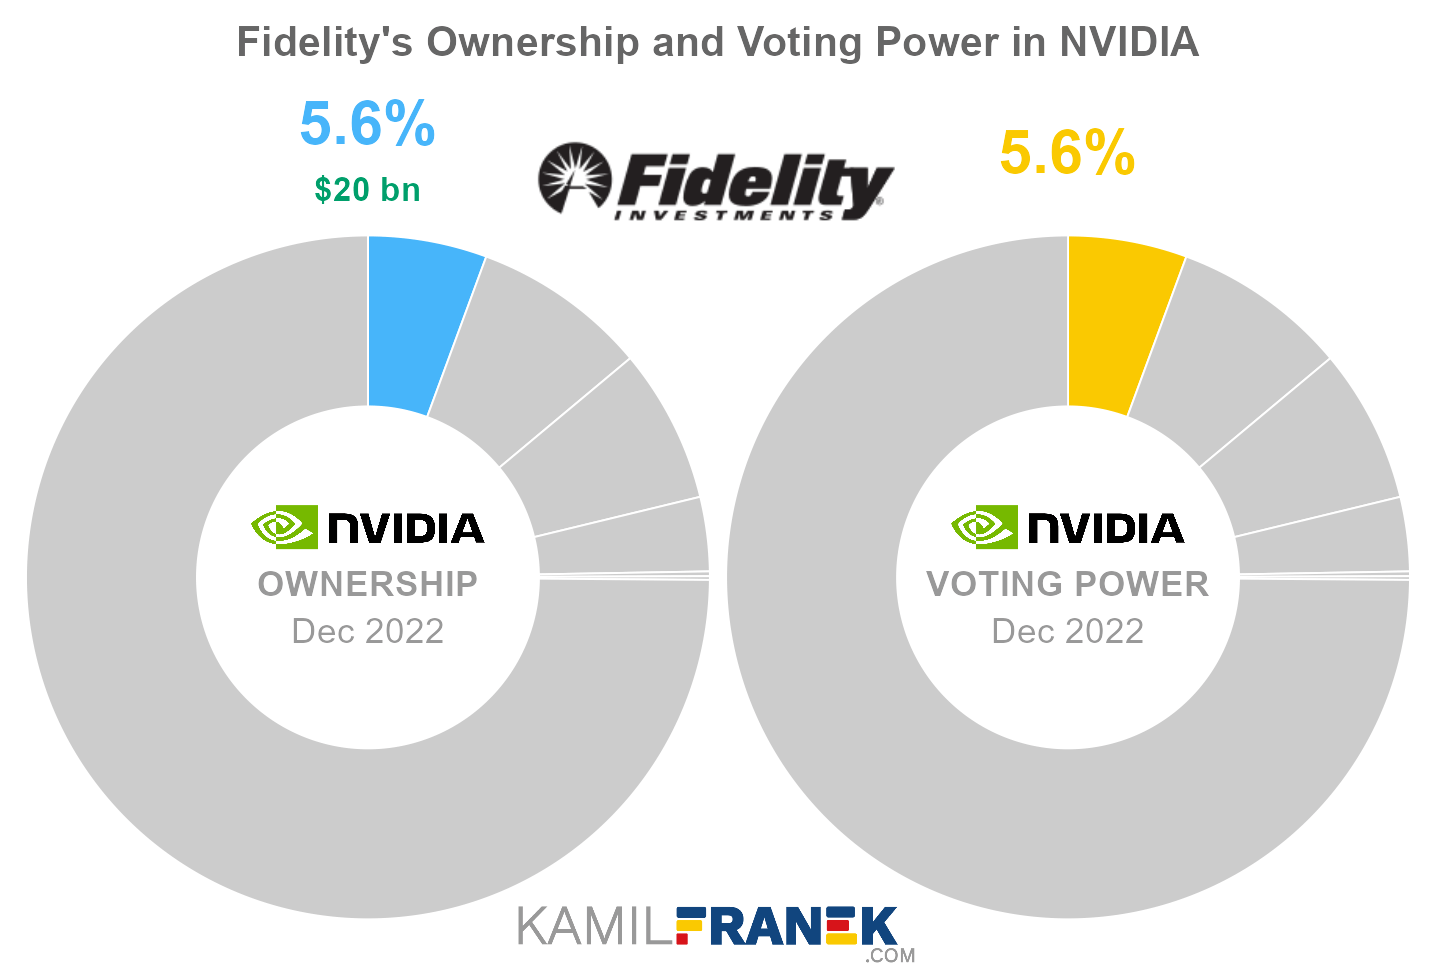 Fidelity's share ownership and voting power in NVIDIA (chart)